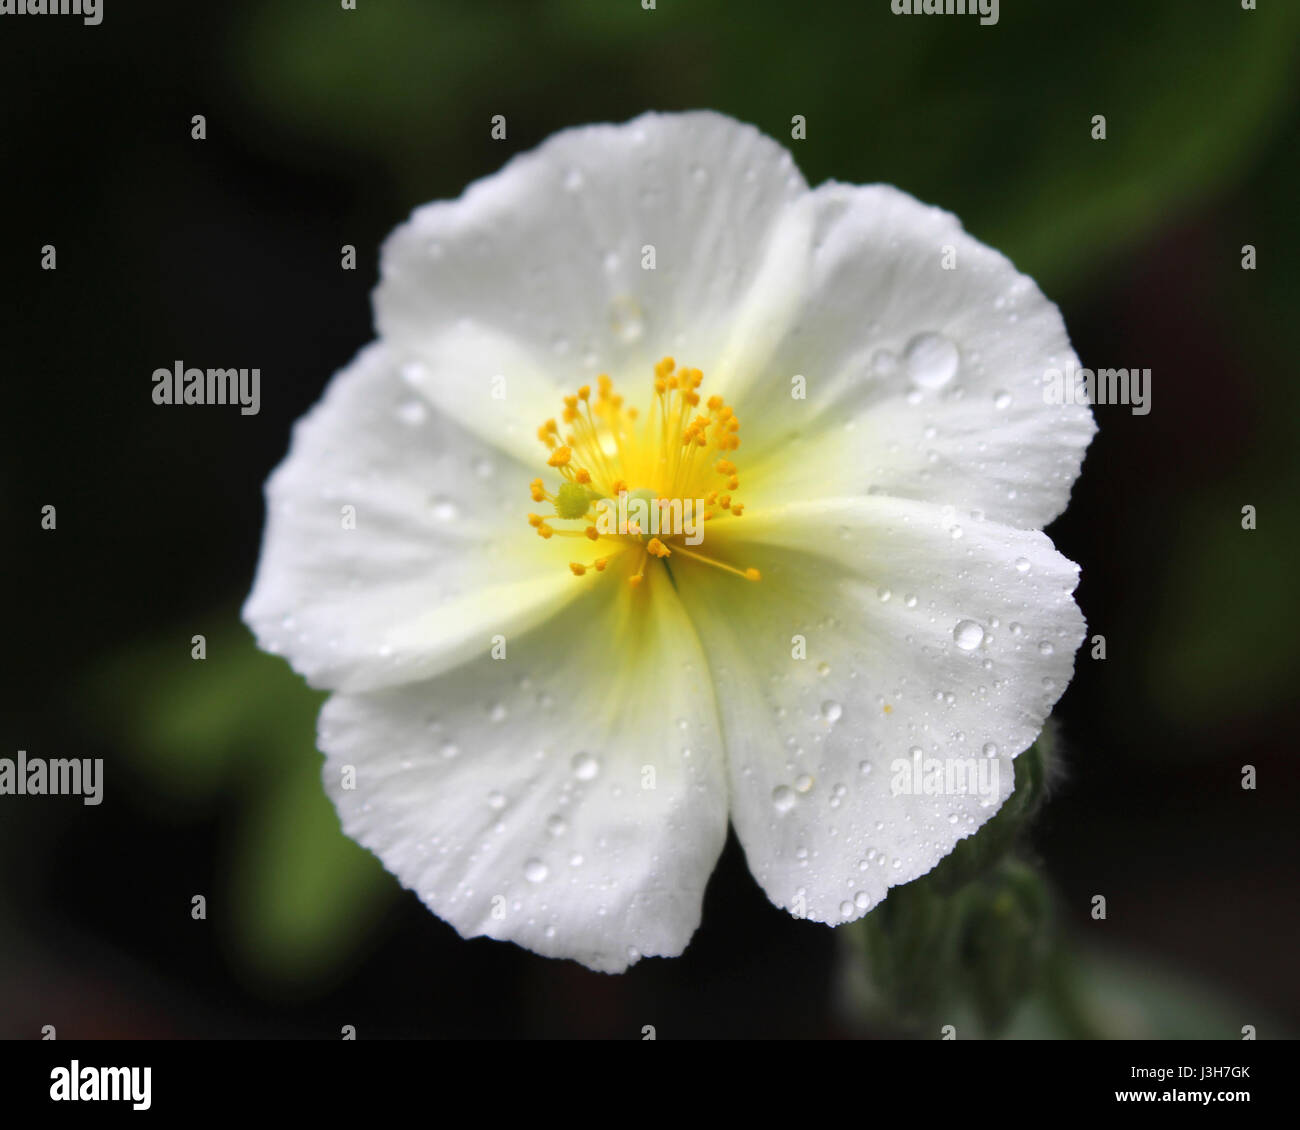 The lovely white flower of Helianthemum apenninum also known as rock rose or sun rose, covered in morning dew. Stock Photo